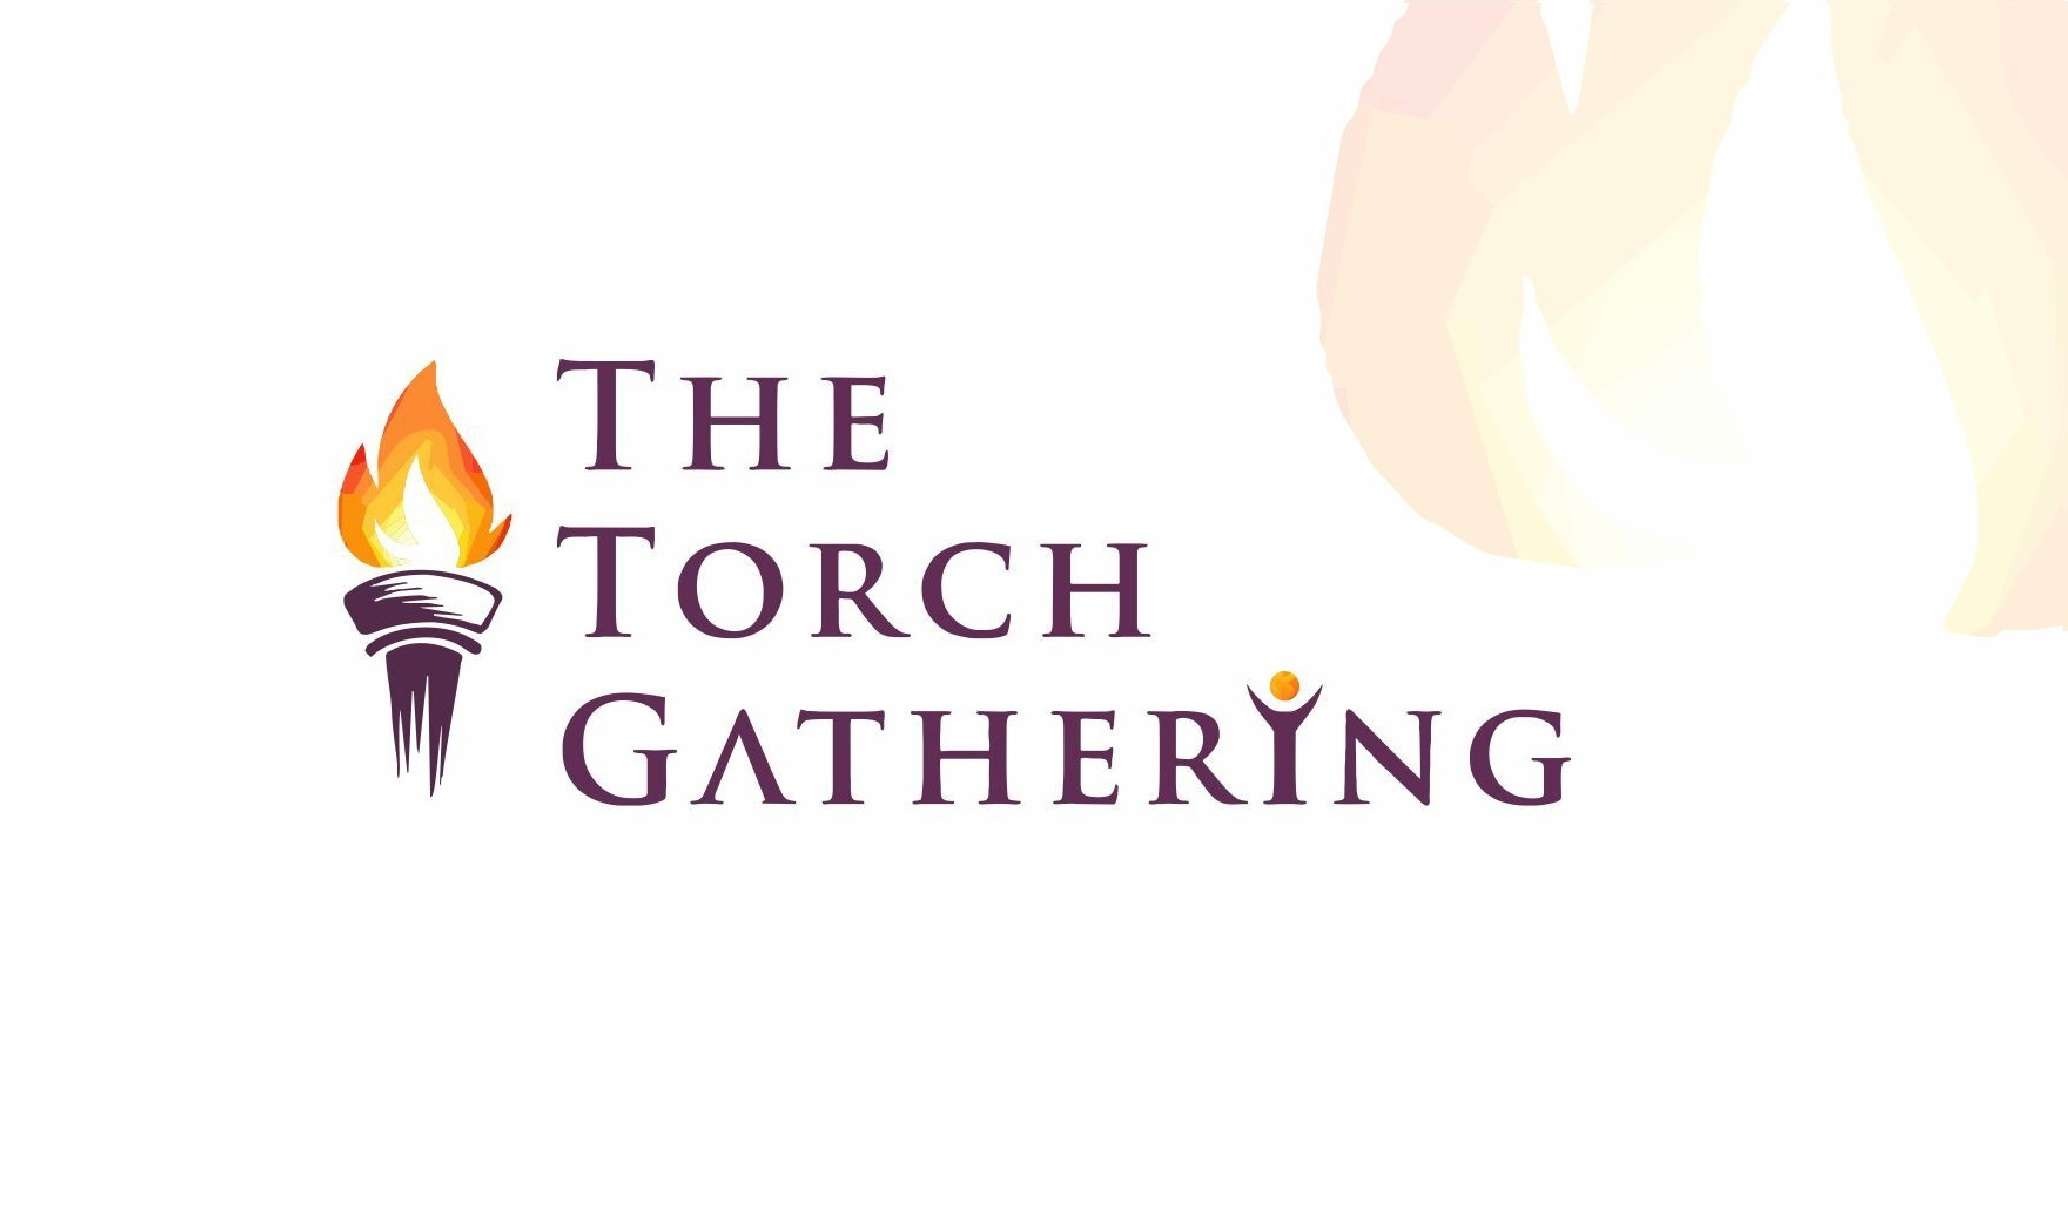 The Torch Gathering